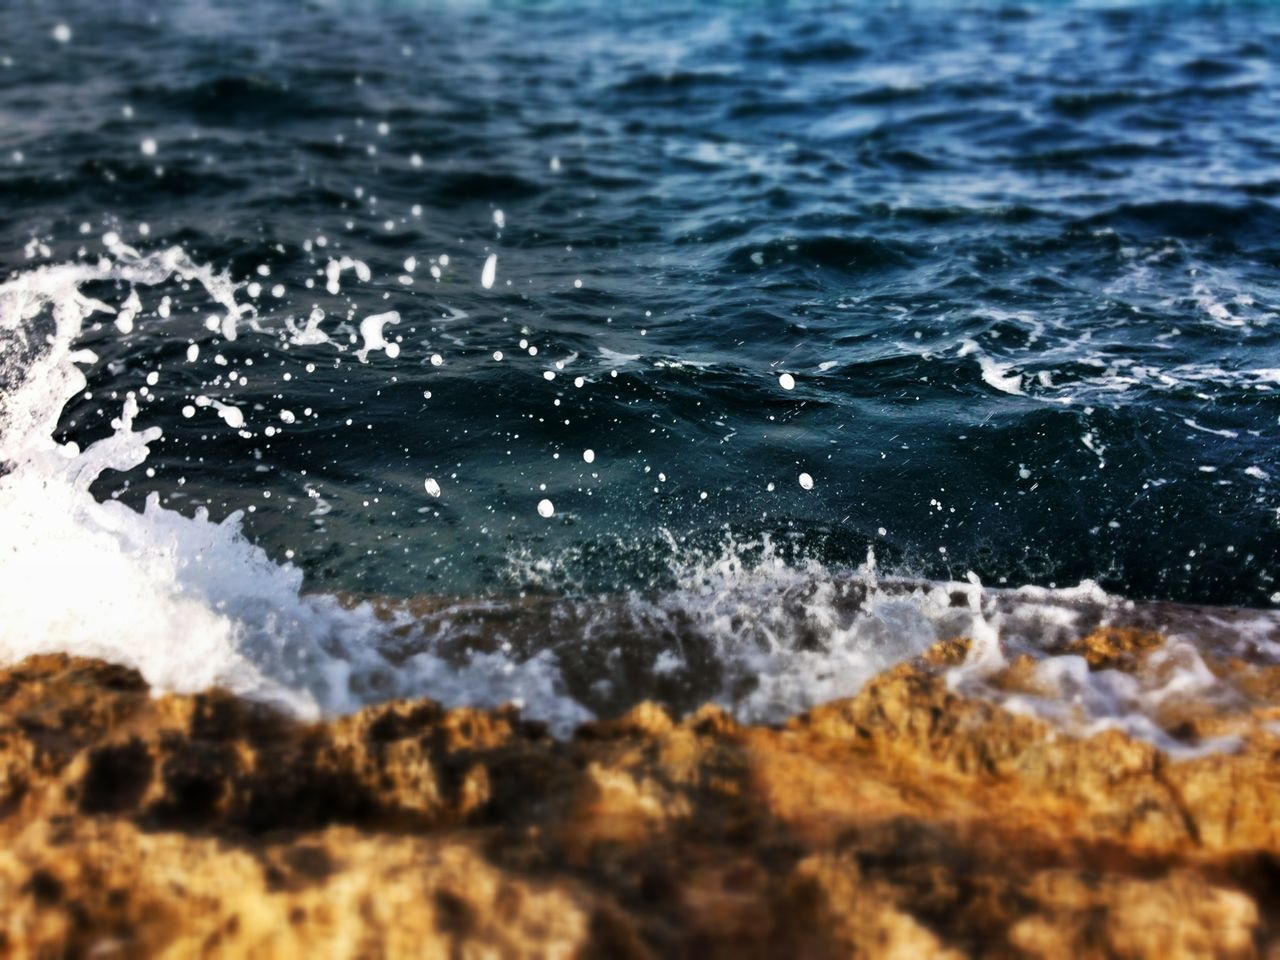 water, sea, wave, surf, beach, rippled, motion, nature, shore, beauty in nature, selective focus, splashing, close-up, tranquility, outdoors, day, no people, surface level, focus on foreground, waterfront